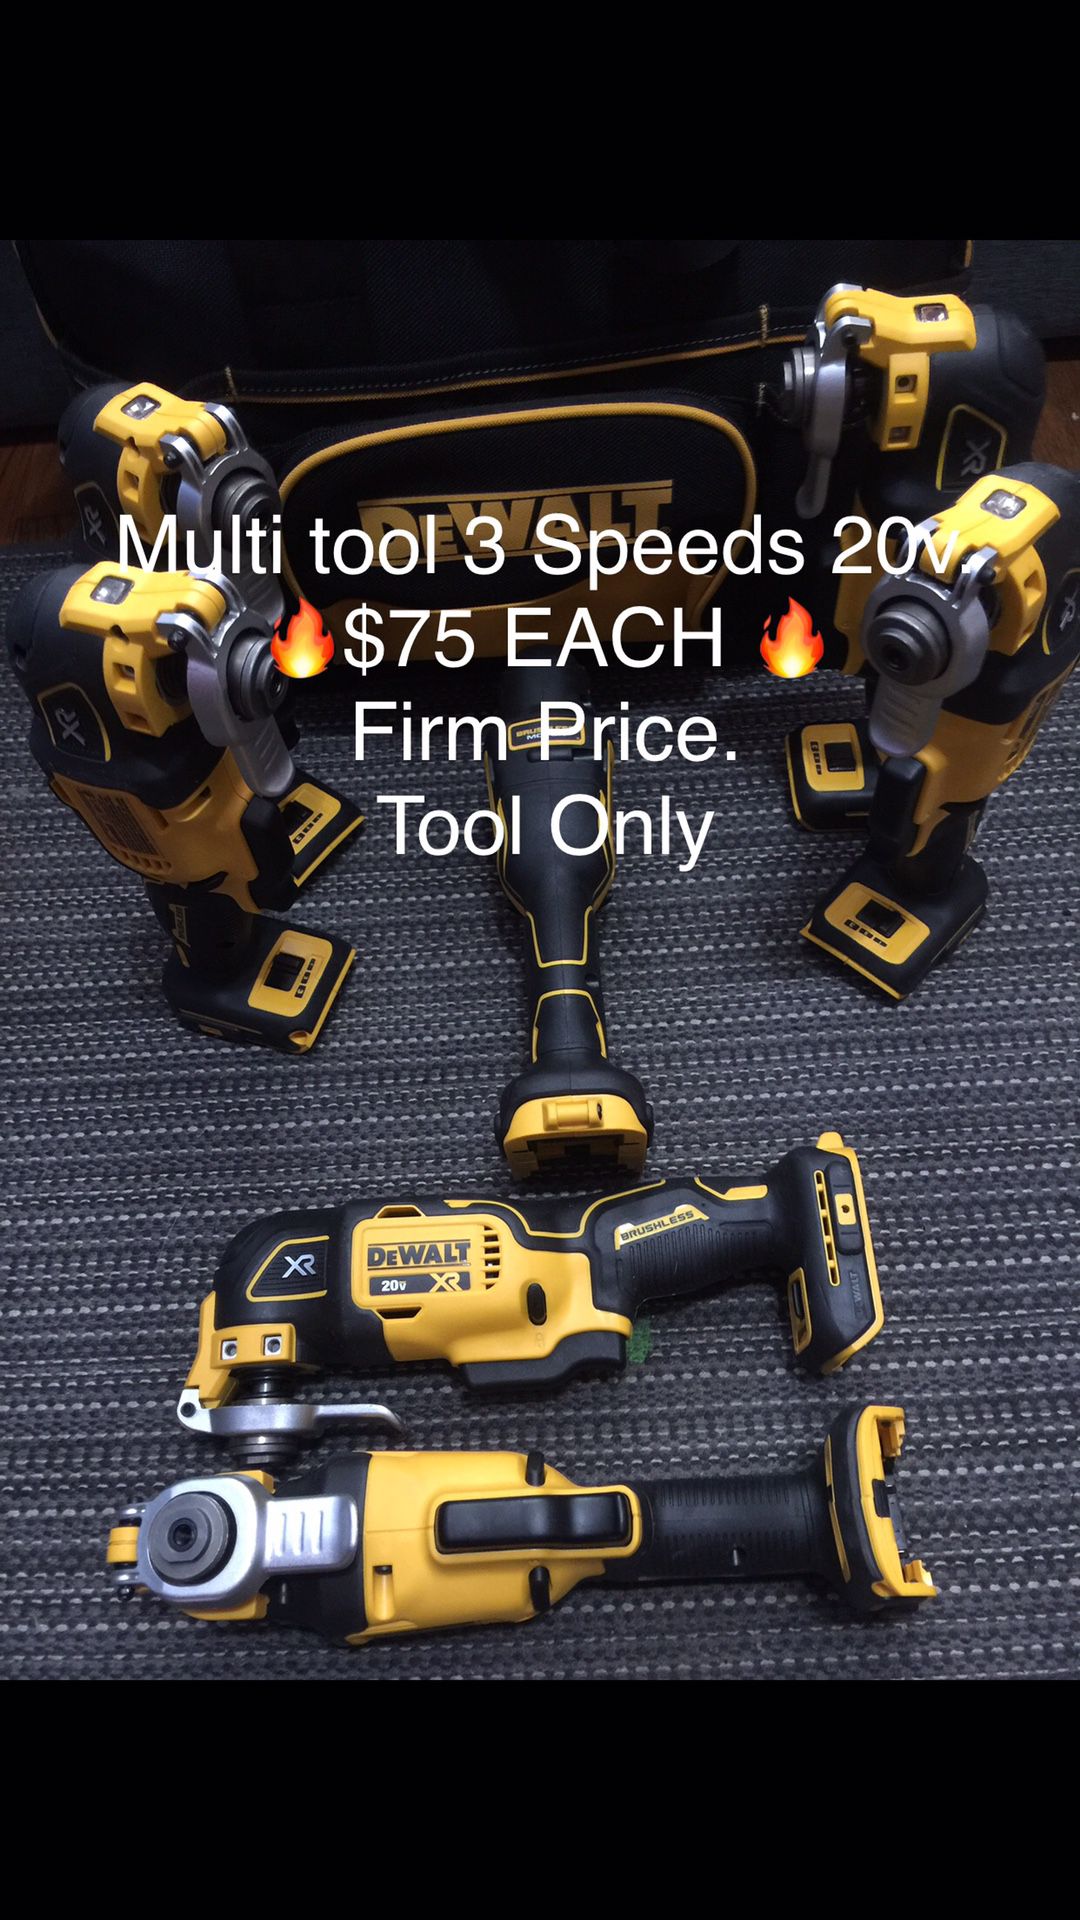 Dewalt Multi Tool XR 3 Speeds 20v. $75 EACH 🔥Firm Price. Today special Only 🔥 Tool Only 😒 means no battery no charger.. pick up in the city of Van Nu